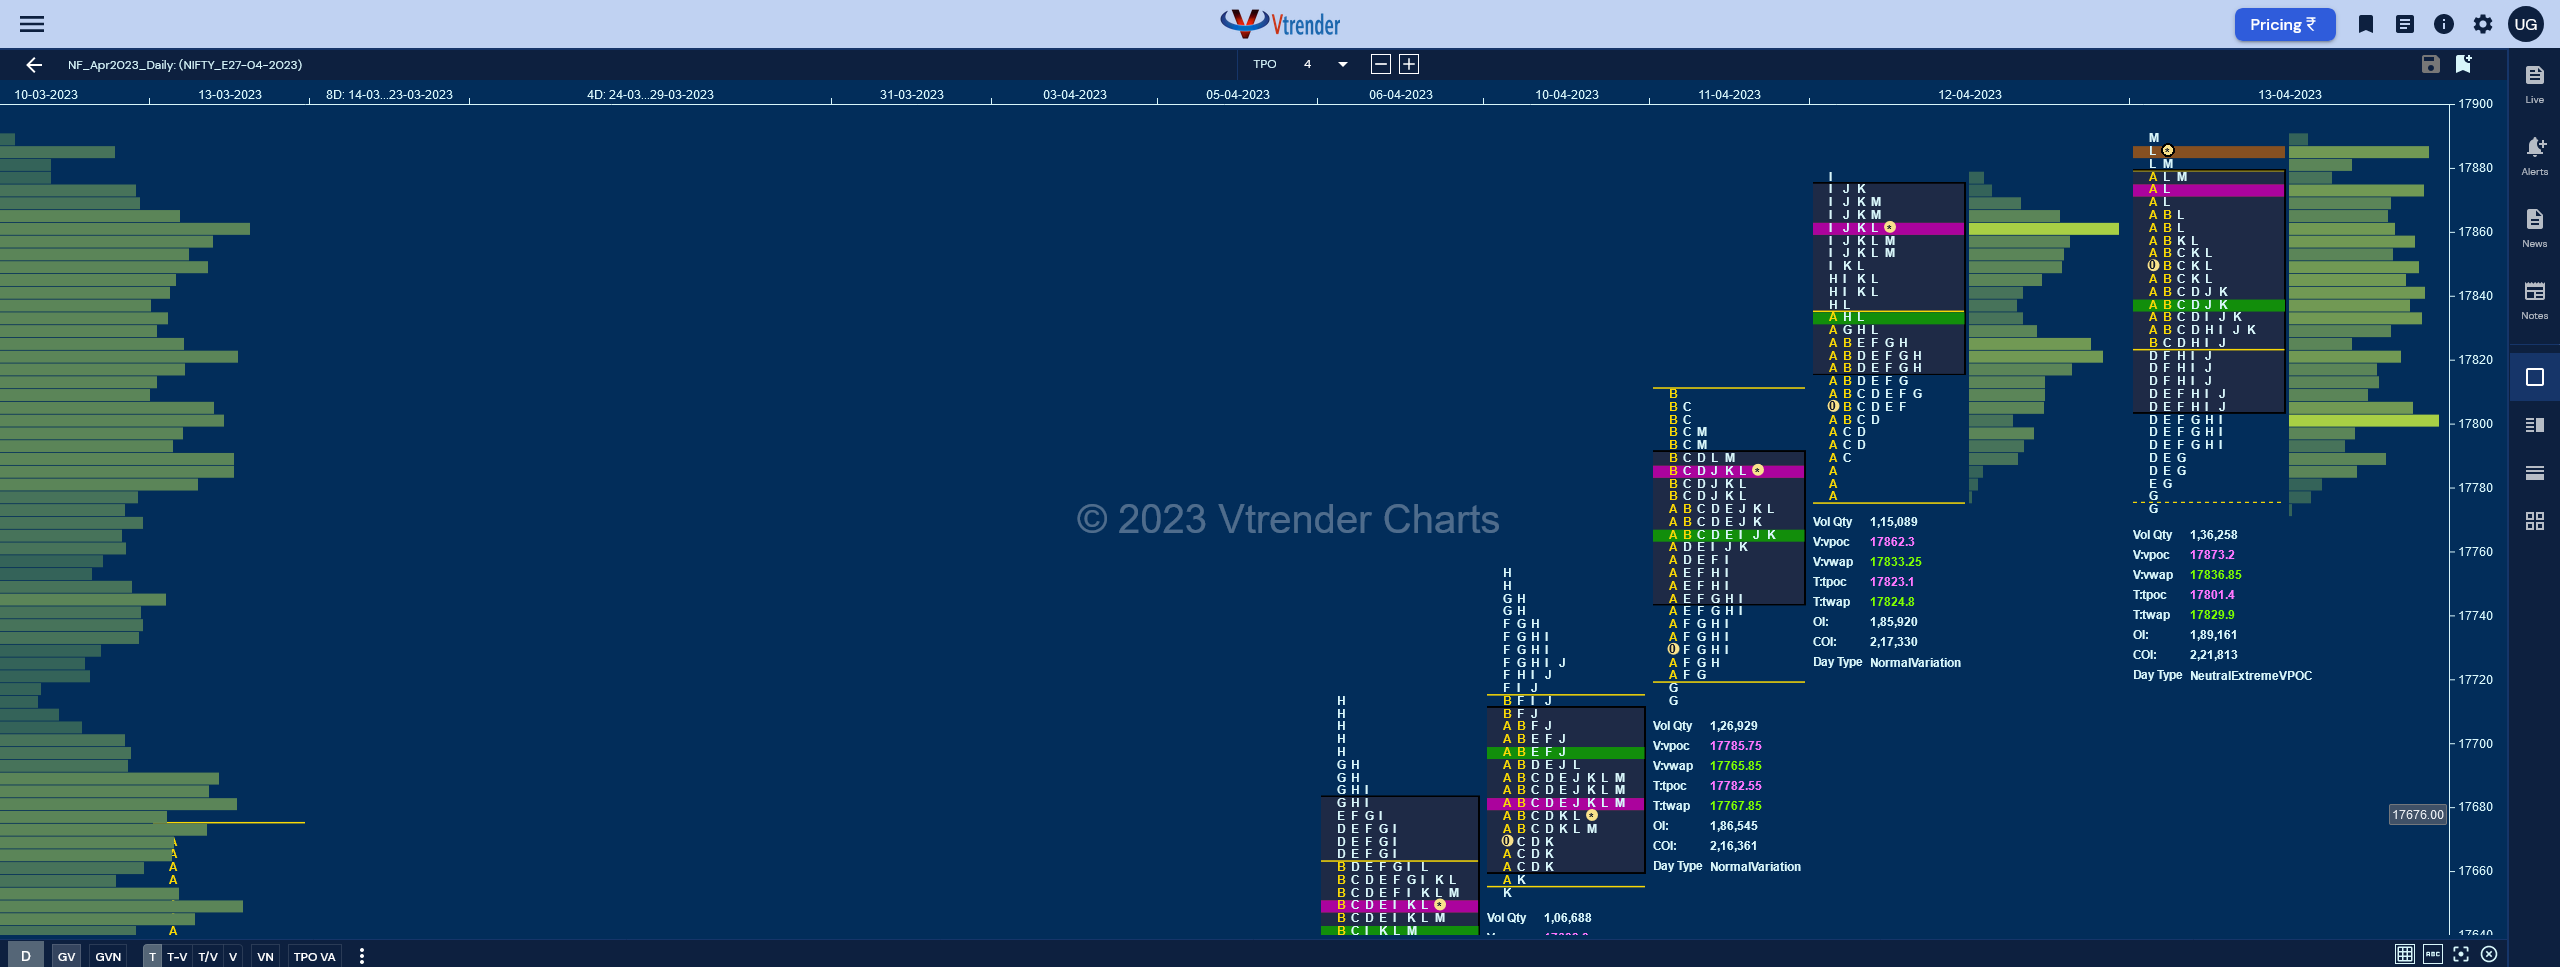 Nf 7 Market Profile Analysis &Amp; Weekly Settlement Report Dated 13Th Apr 2023 Banknifty Futures, Charts, Day Trading, Intraday Trading, Intraday Trading Strategies, Market Profile, Market Profile Trading Strategies, Nifty Futures, Order Flow Analysis, Support And Resistance, Technical Analysis, Trading Strategies, Volume Profile Trading